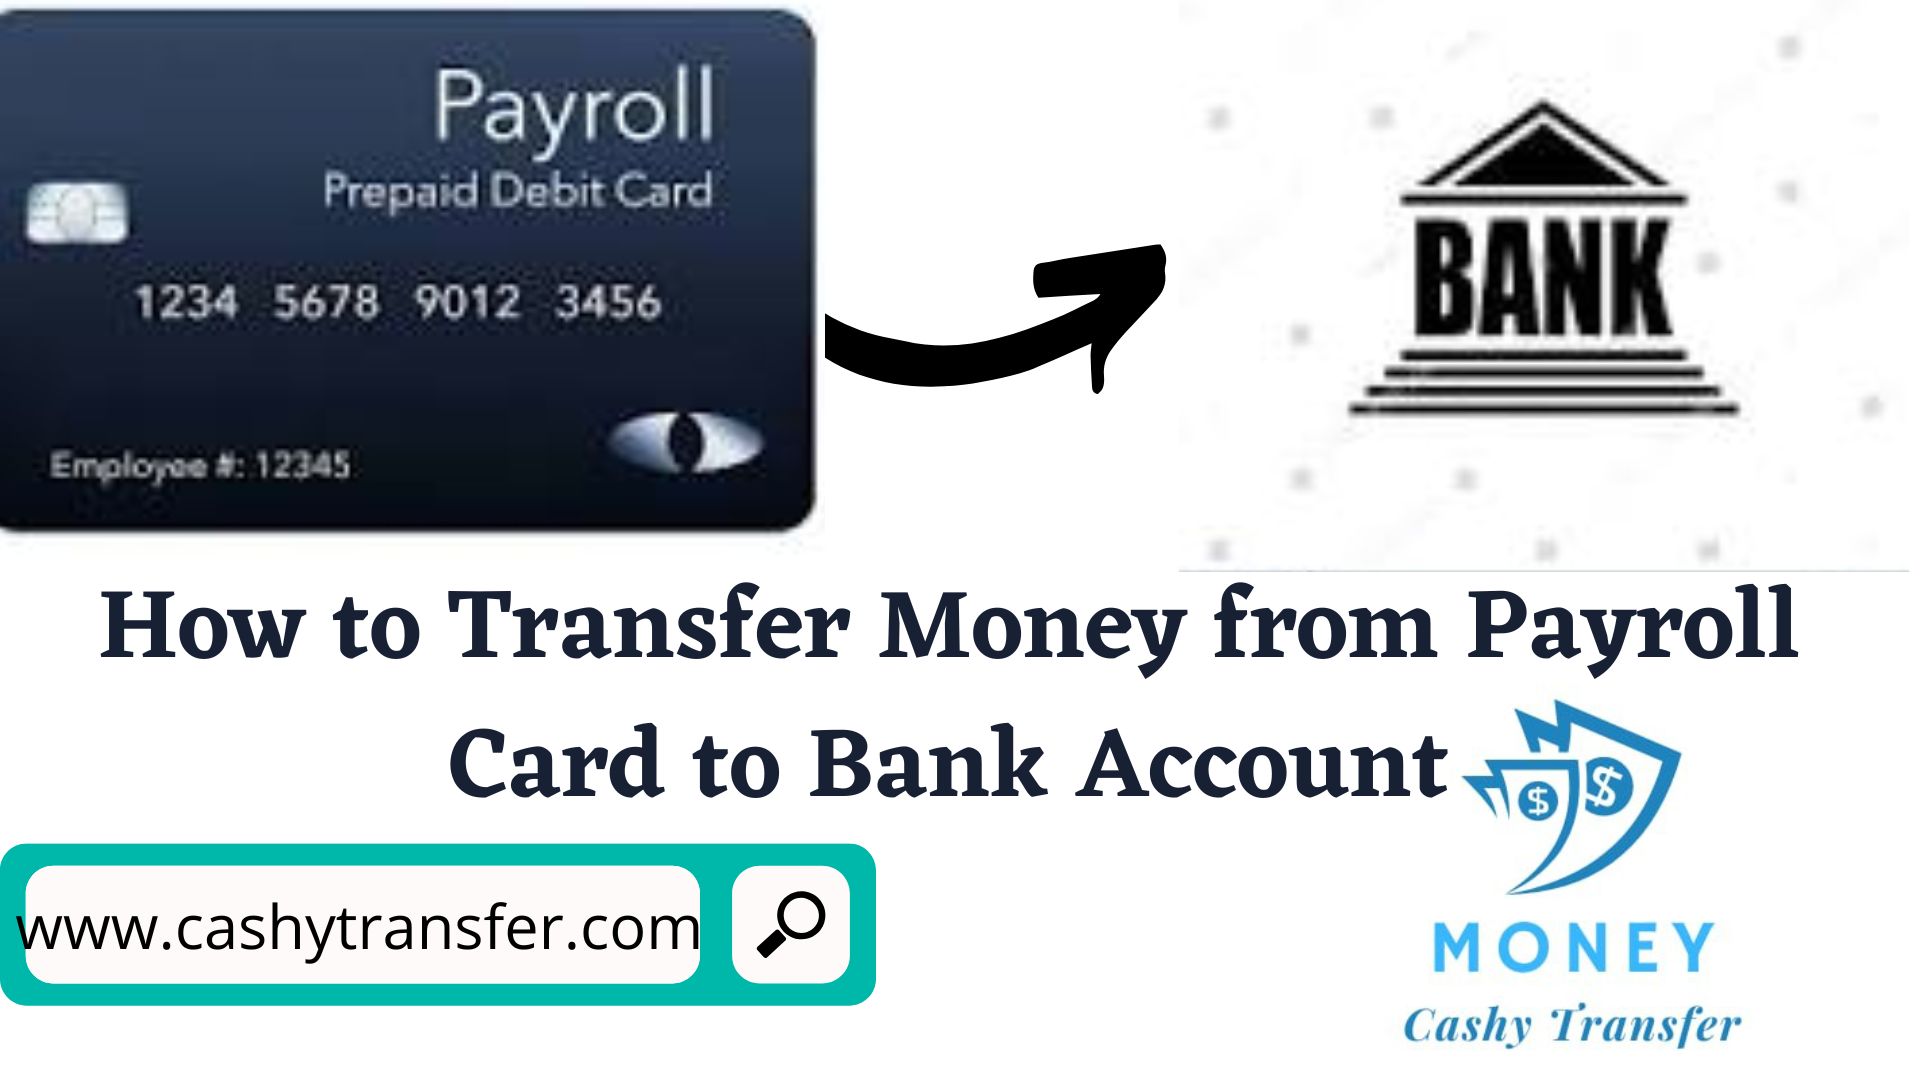 Transfer Money from Payroll Card to Bank Account